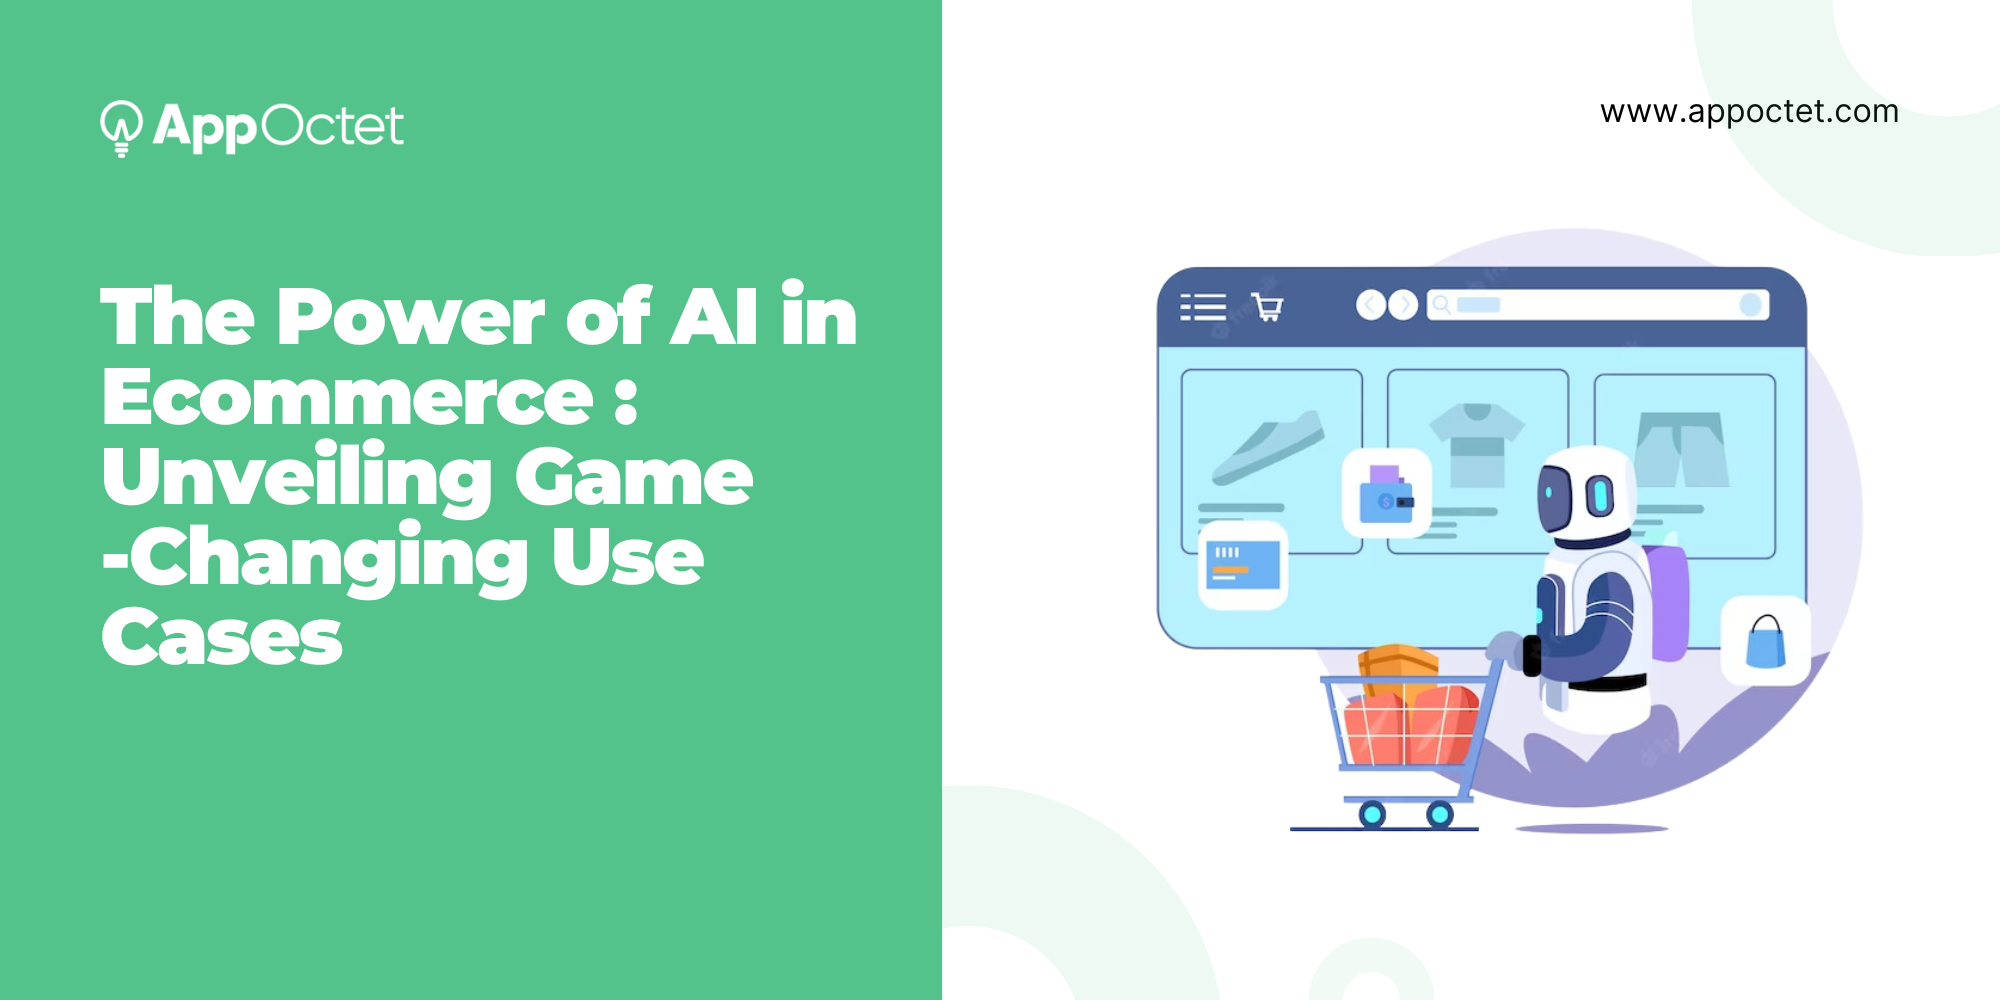 The power of AI in e-commerce